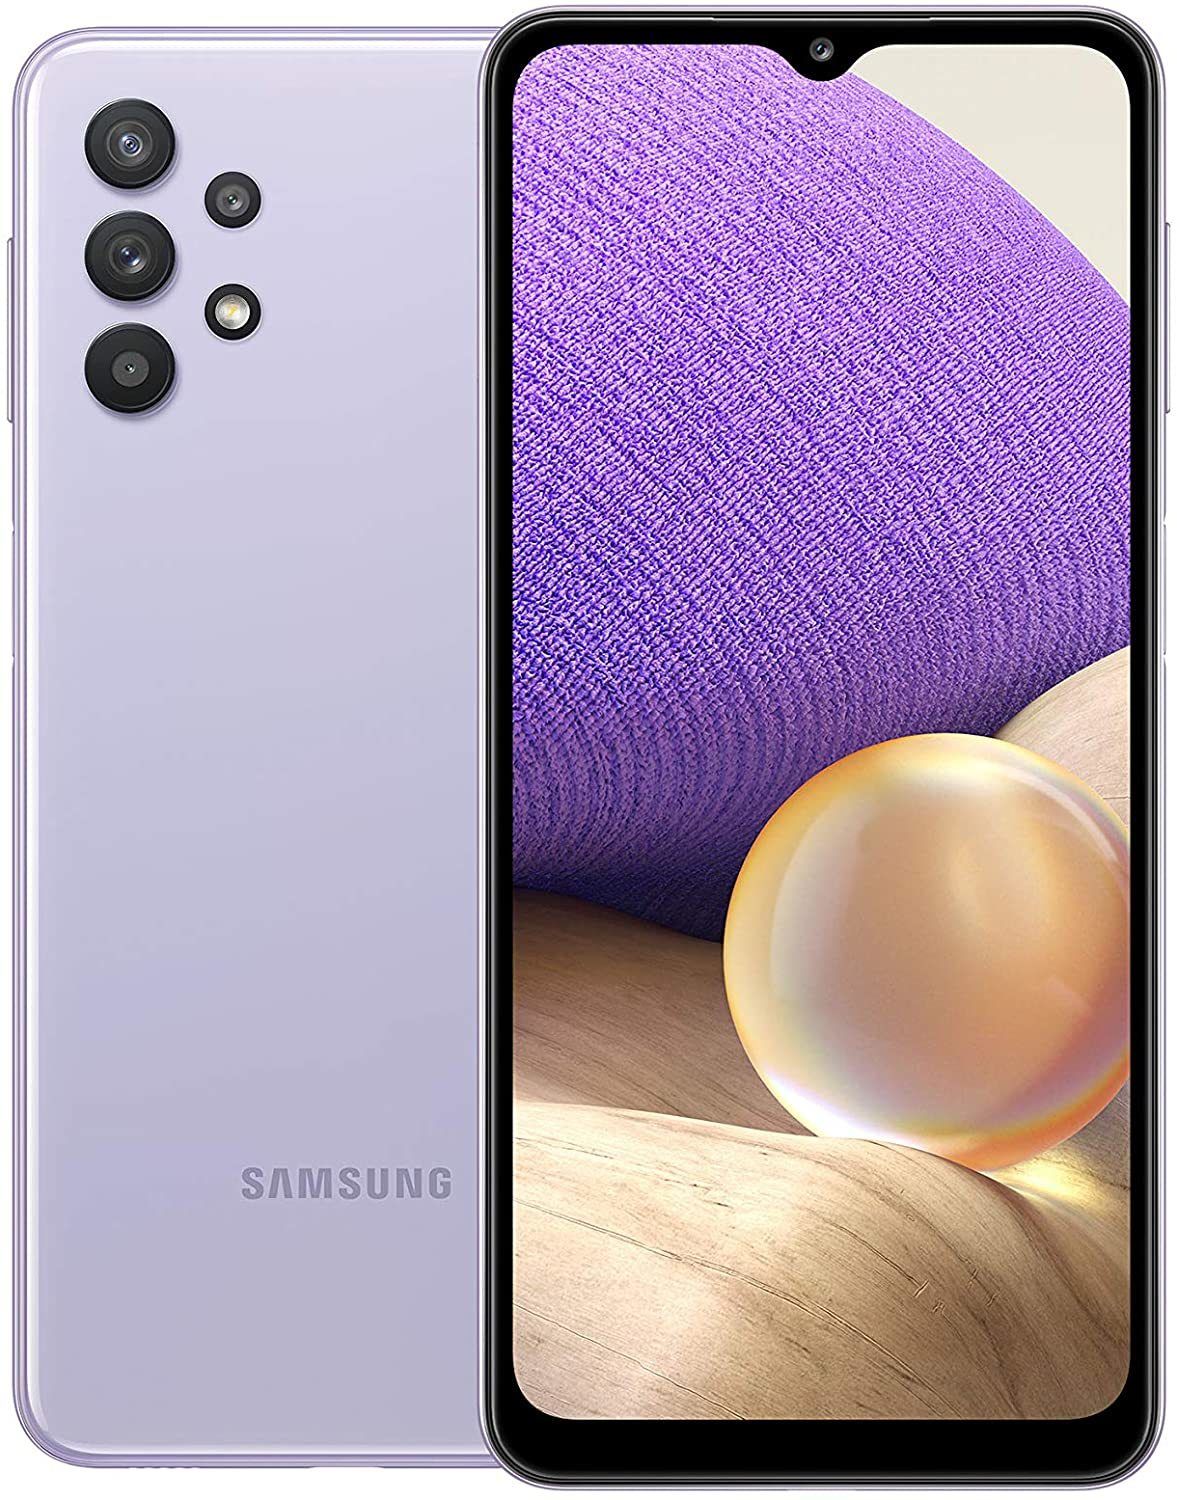 Samsung Galaxy A32 5G SM-A326B Awesome Violet 128GB 6GB RAM Gsm Unlocked  Phone MediaTek MT6853 Dimensity 720 5G 48MP The phone comes with a  6.50-inch touchscreen display. Samsung Galaxy A32 5G is